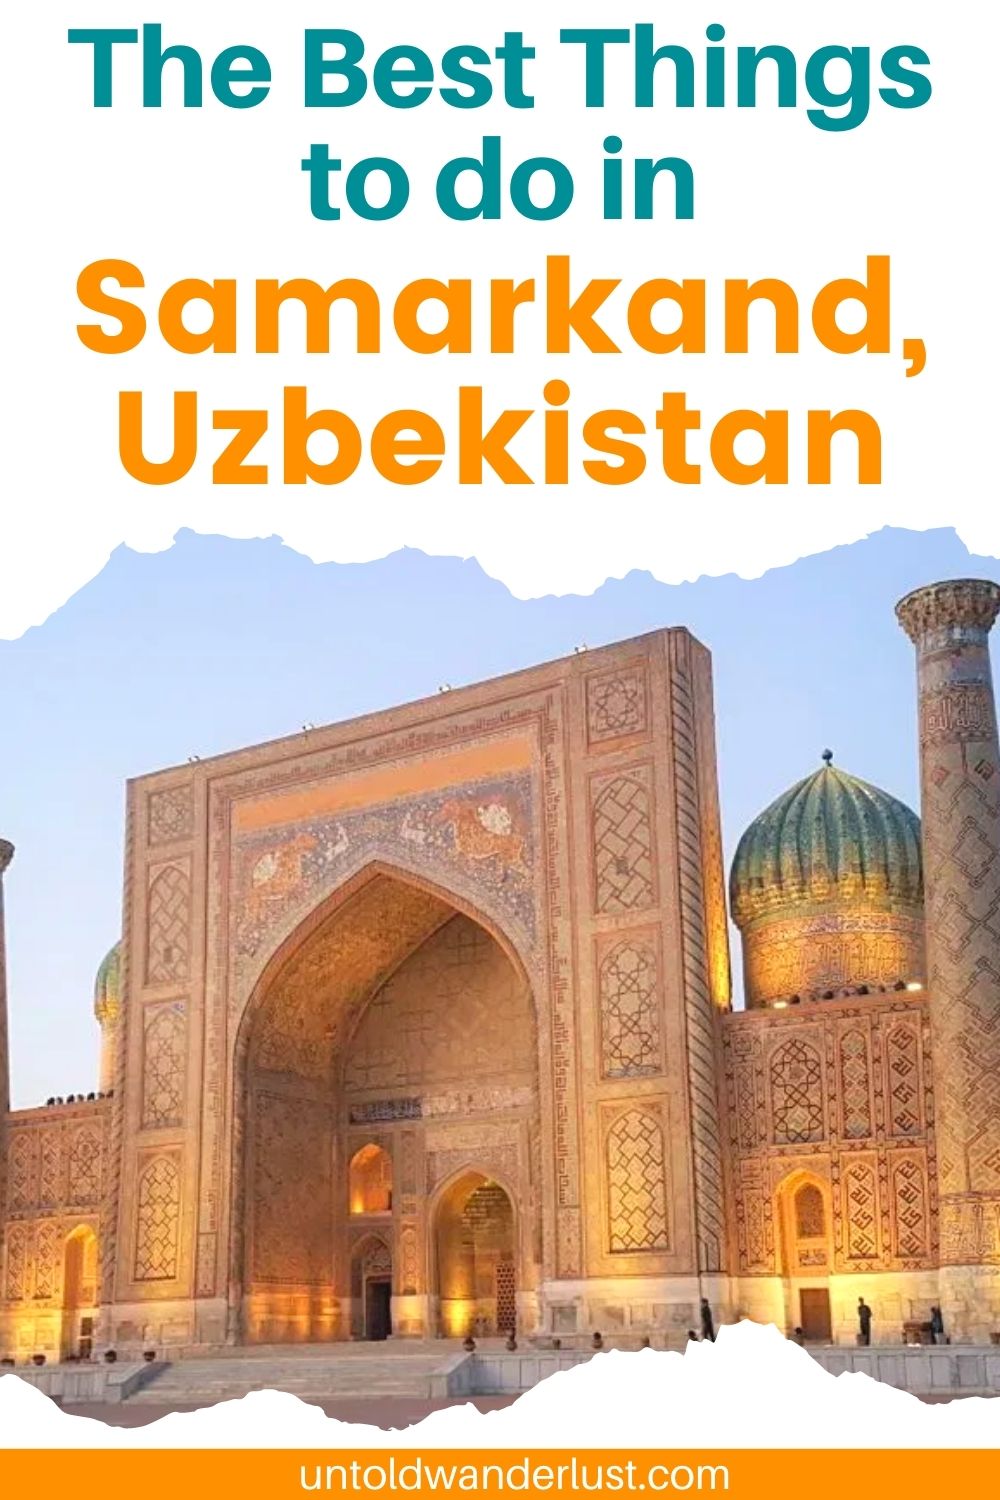 The Best Things to do in Samarkand, Uzbekistan